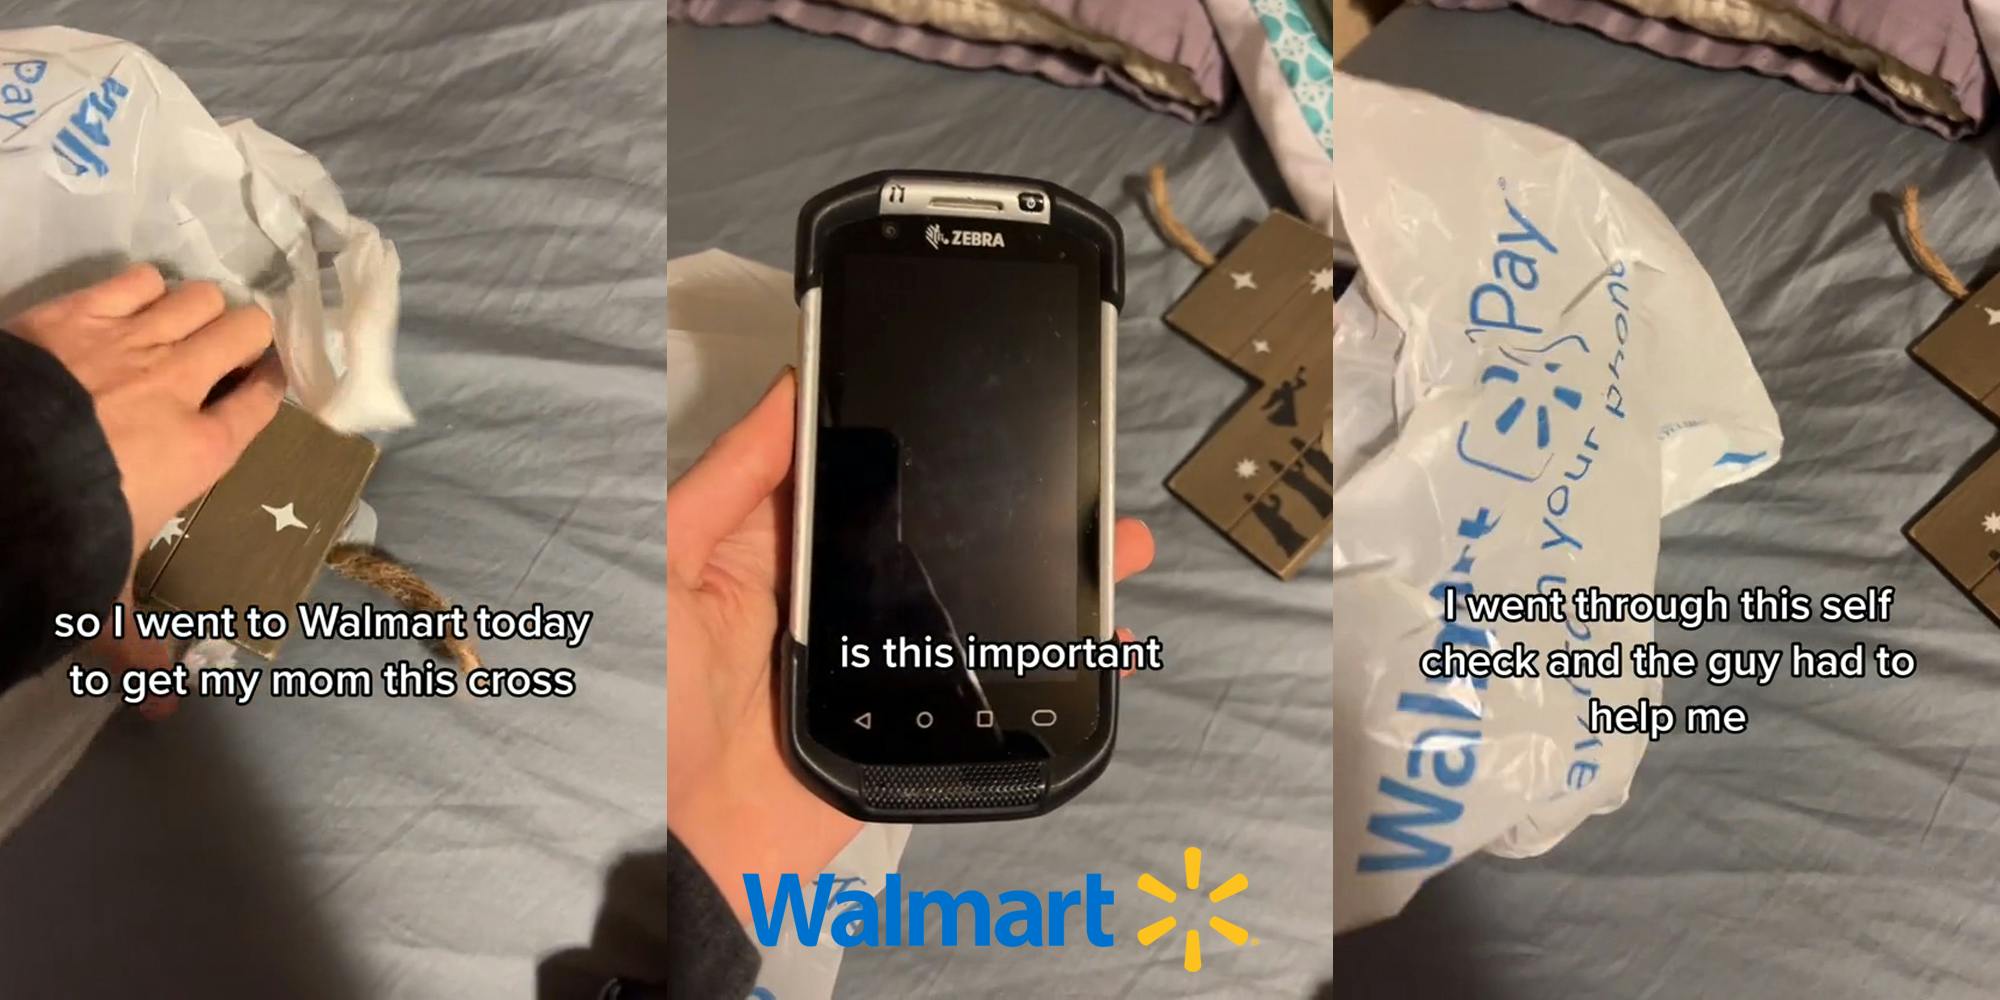 person grabbing cross out of Walmart bag caption "so I went to Walmart today to get my mom this cross" (l) person holding Walmart zebra scanner with Walmart logo at bottom caption "is this important" (c) person hand in Walmart bag caption "I went through this self check and the guy had to help me" (r)